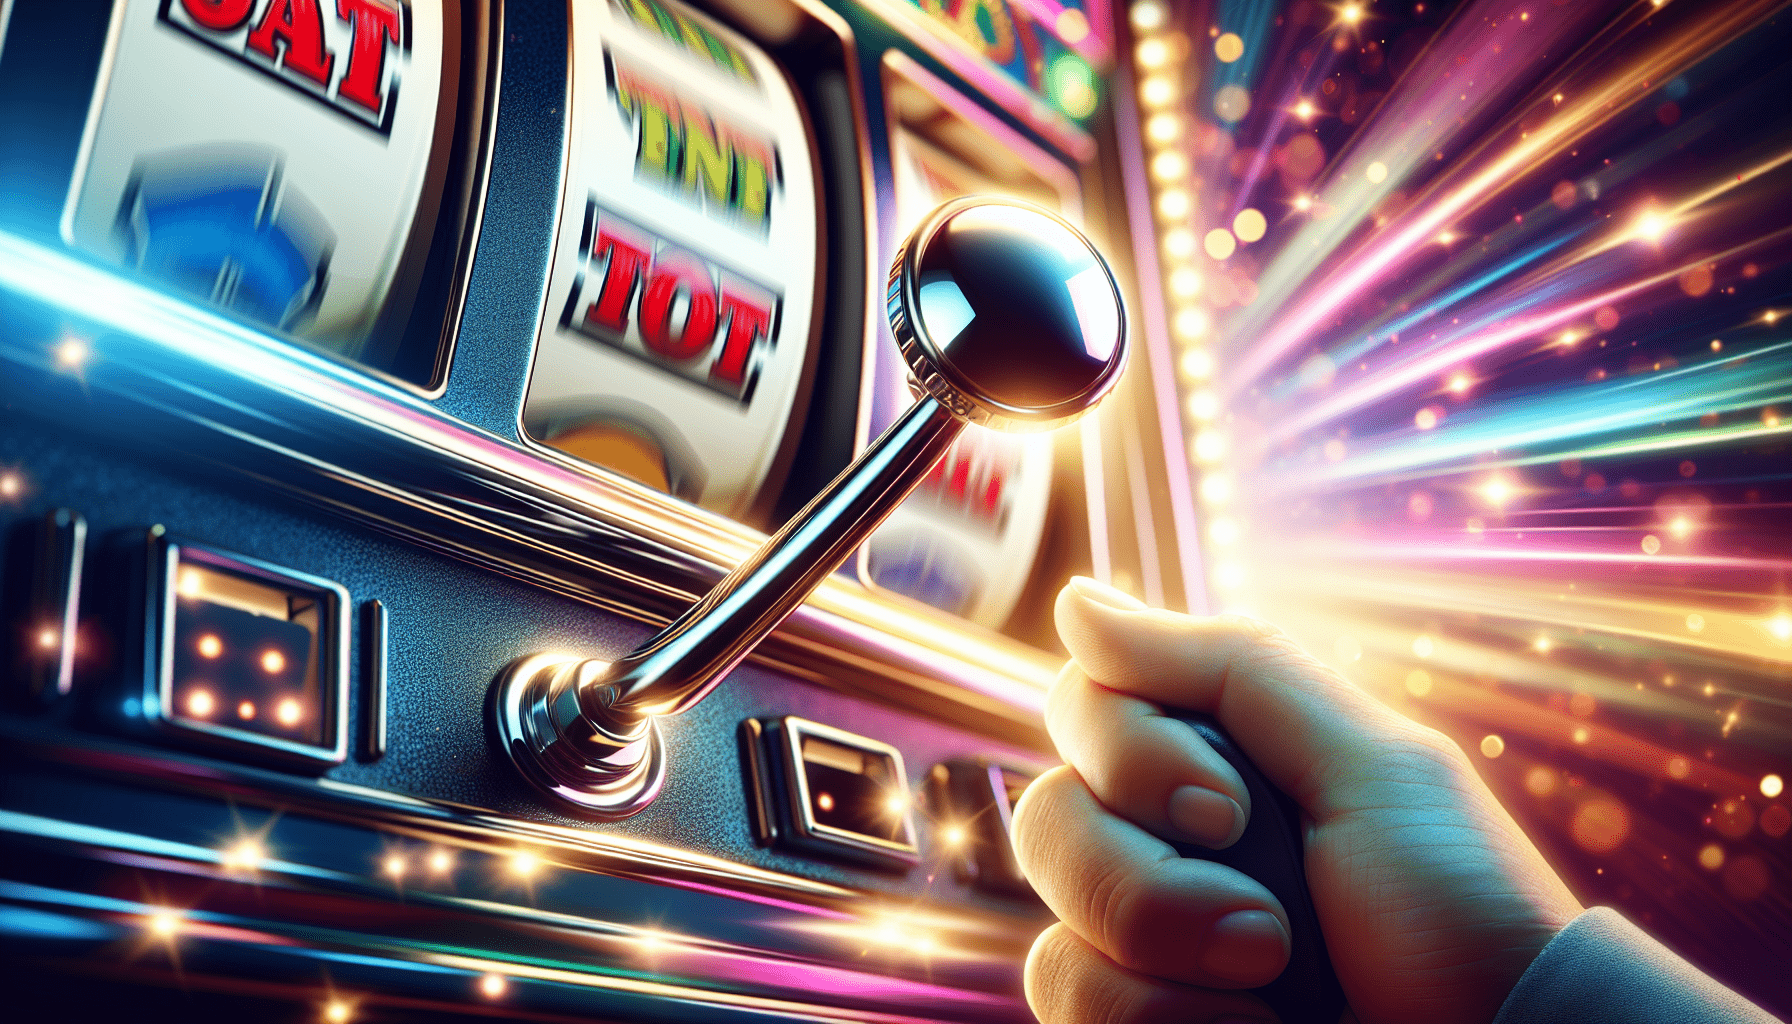 How Much Does It Cost To Use A Slot Machine?